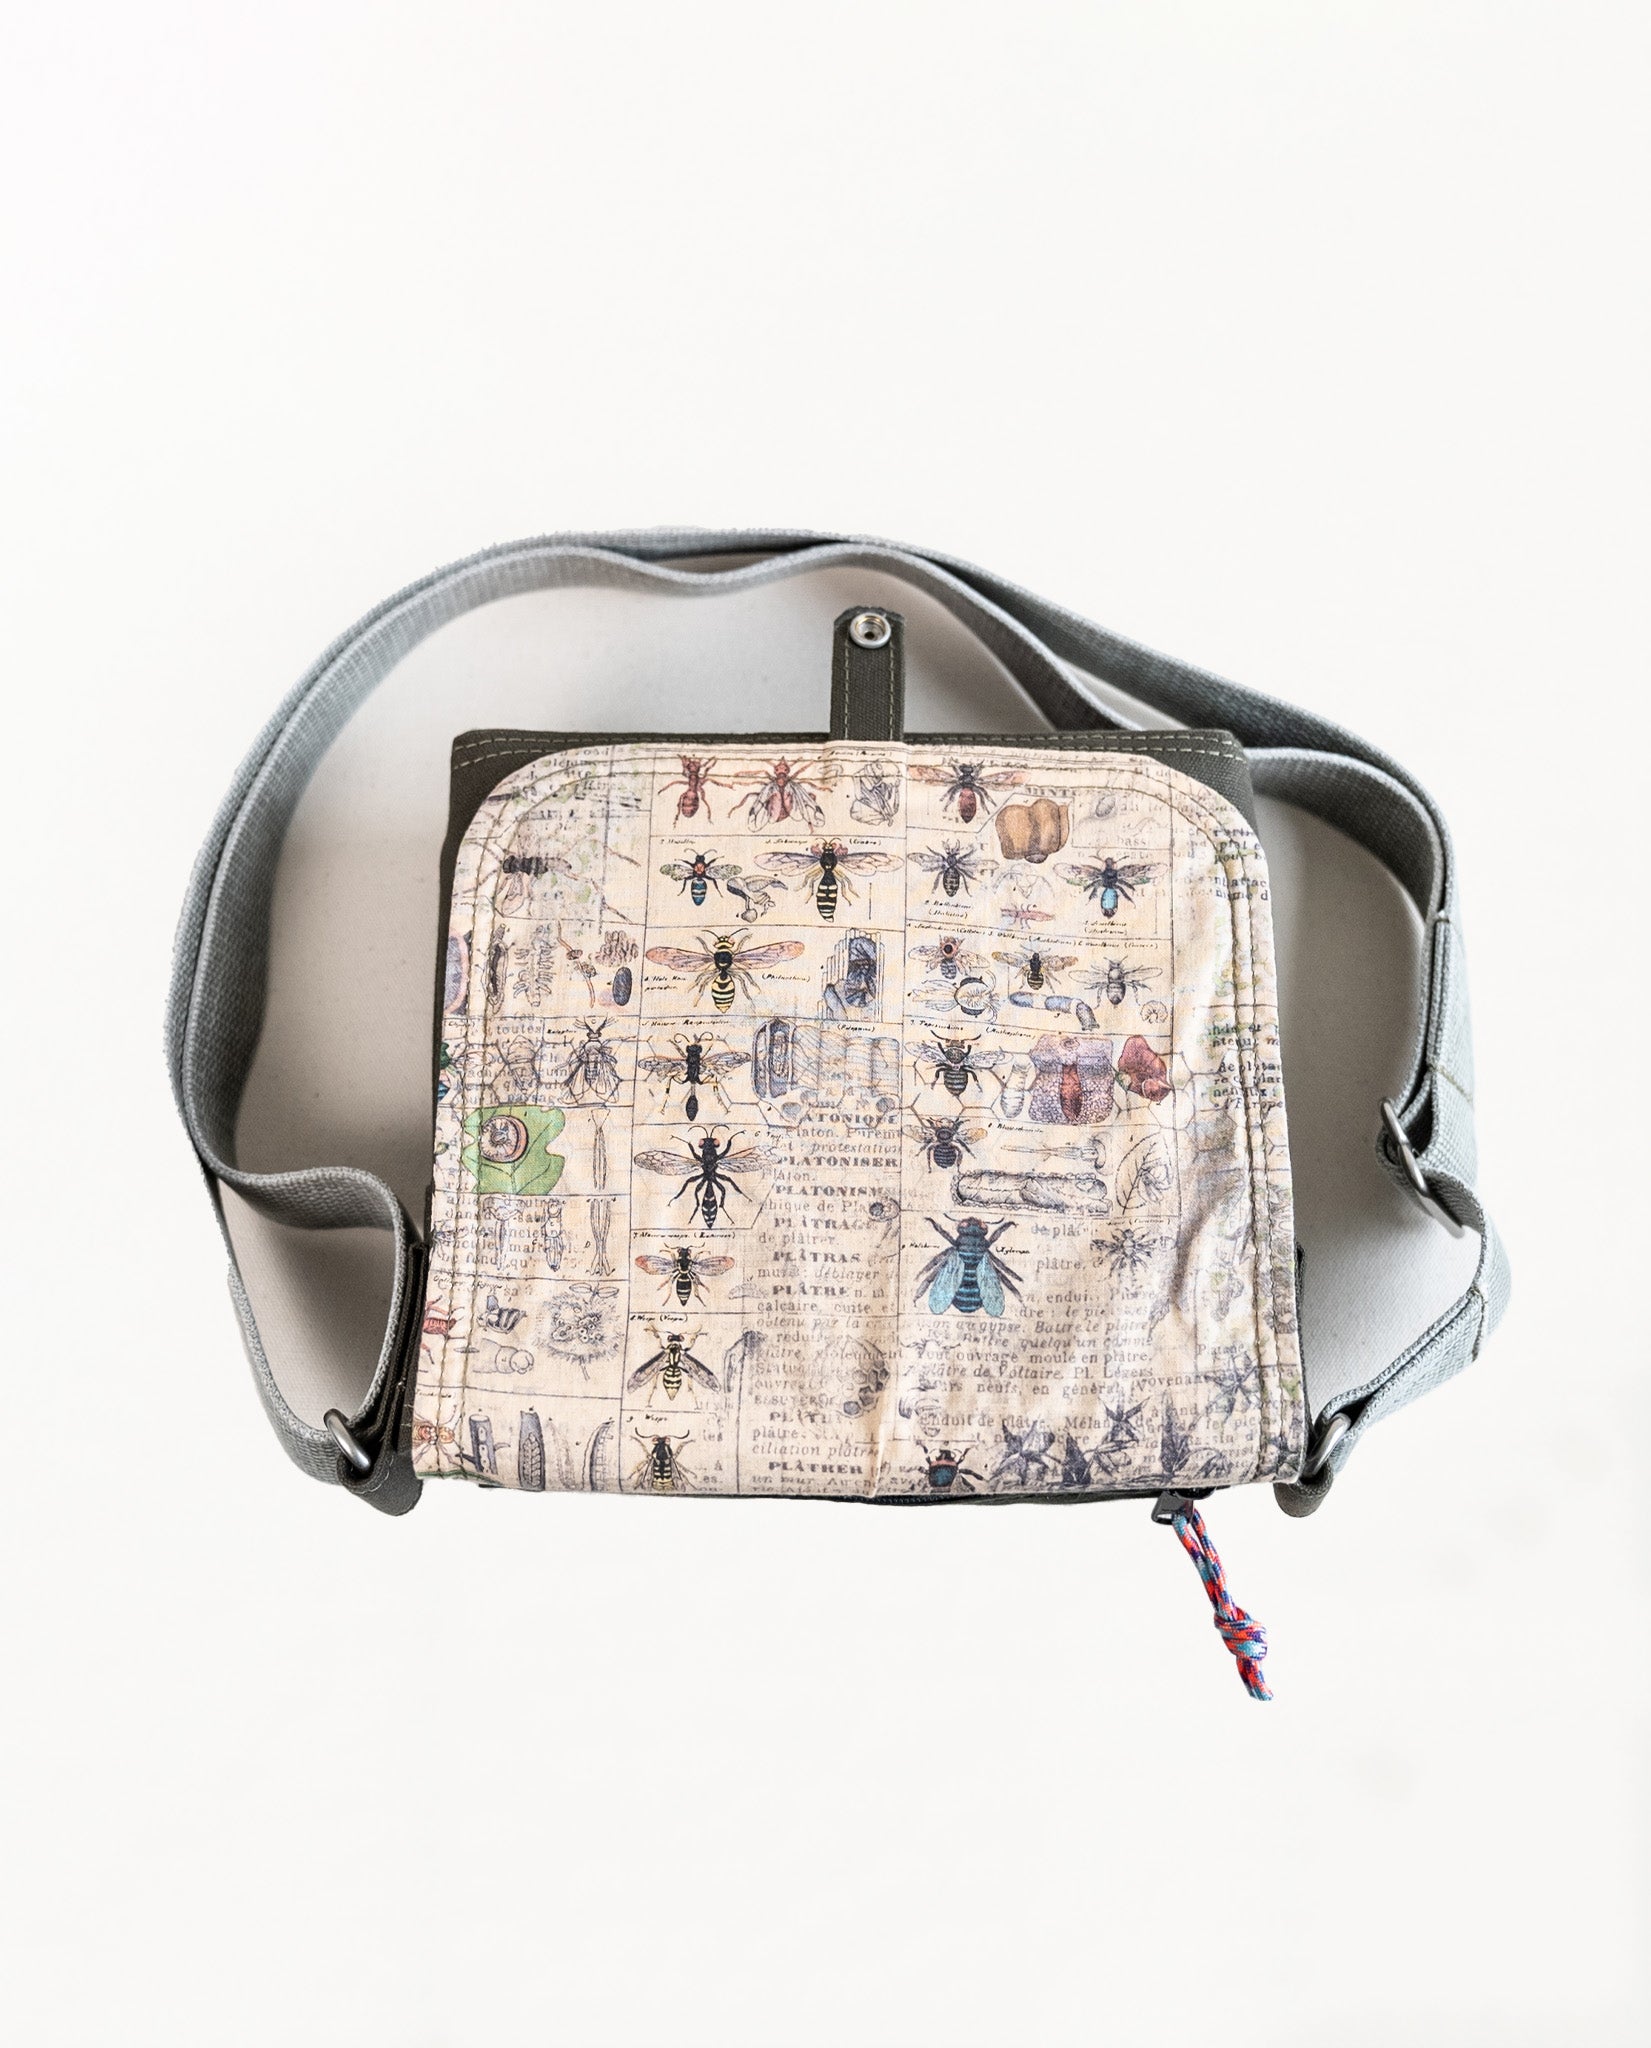 Inside of flap showing entomology print lining fabric of Dock 5’s Wild Cat Canvas Mini Messenger Bag in olive featuring art from owner Natalija Walbridge